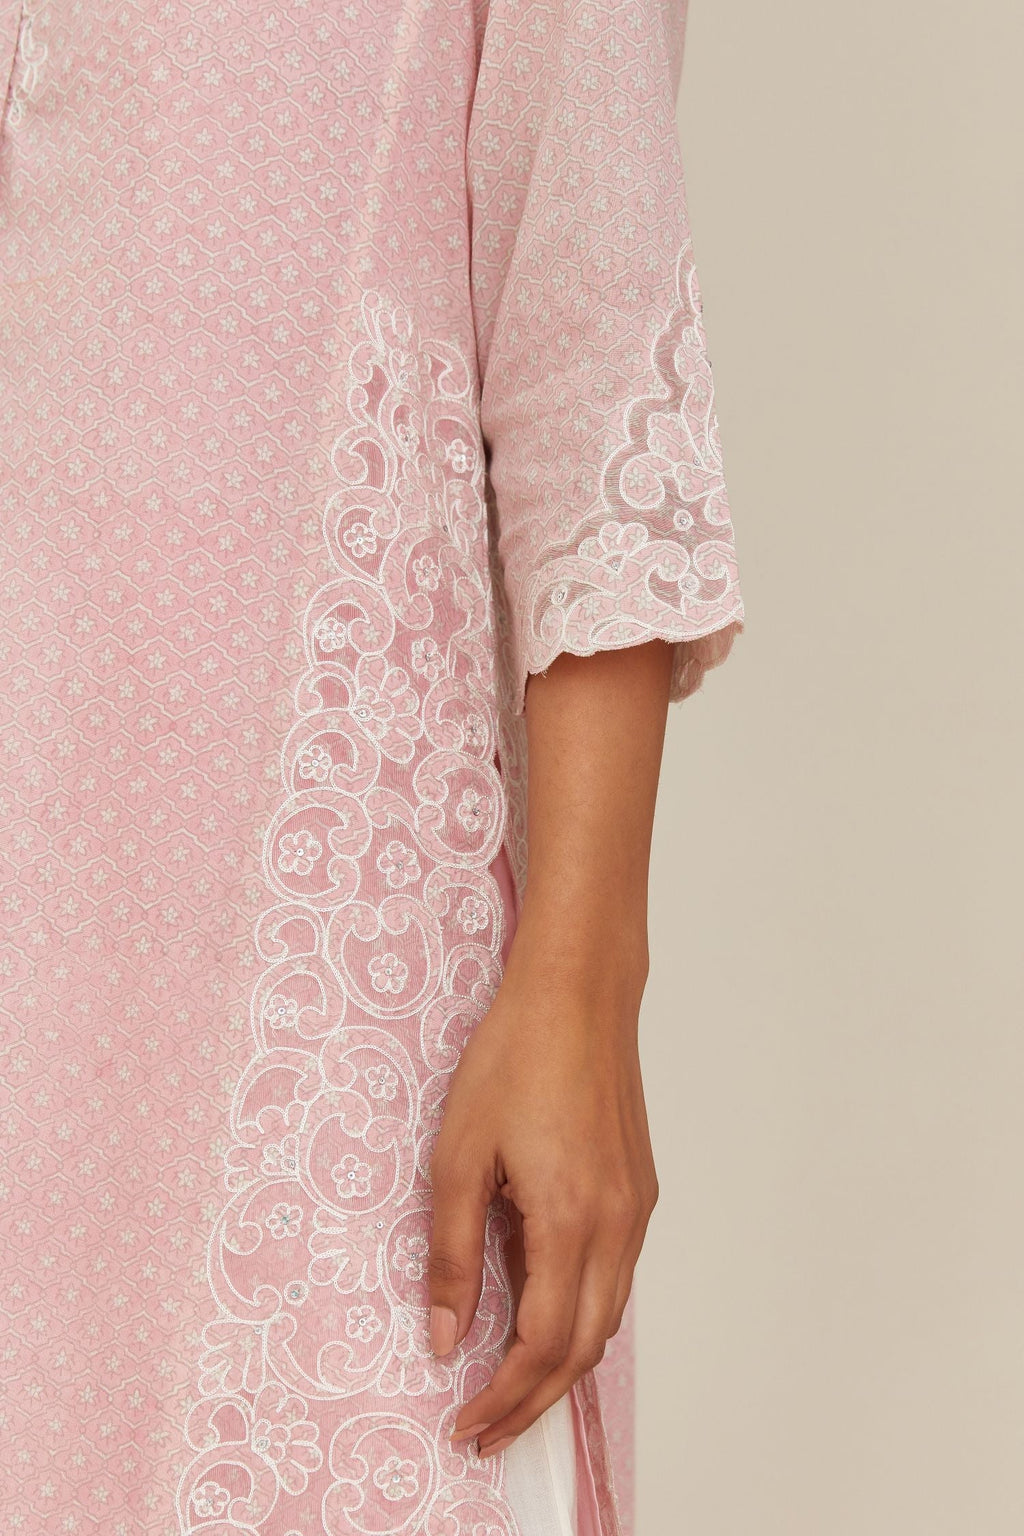 Pink hand block over-printed cotton straight kurta set with cotton chanderi cutwork embroidery highlighted with sequins.